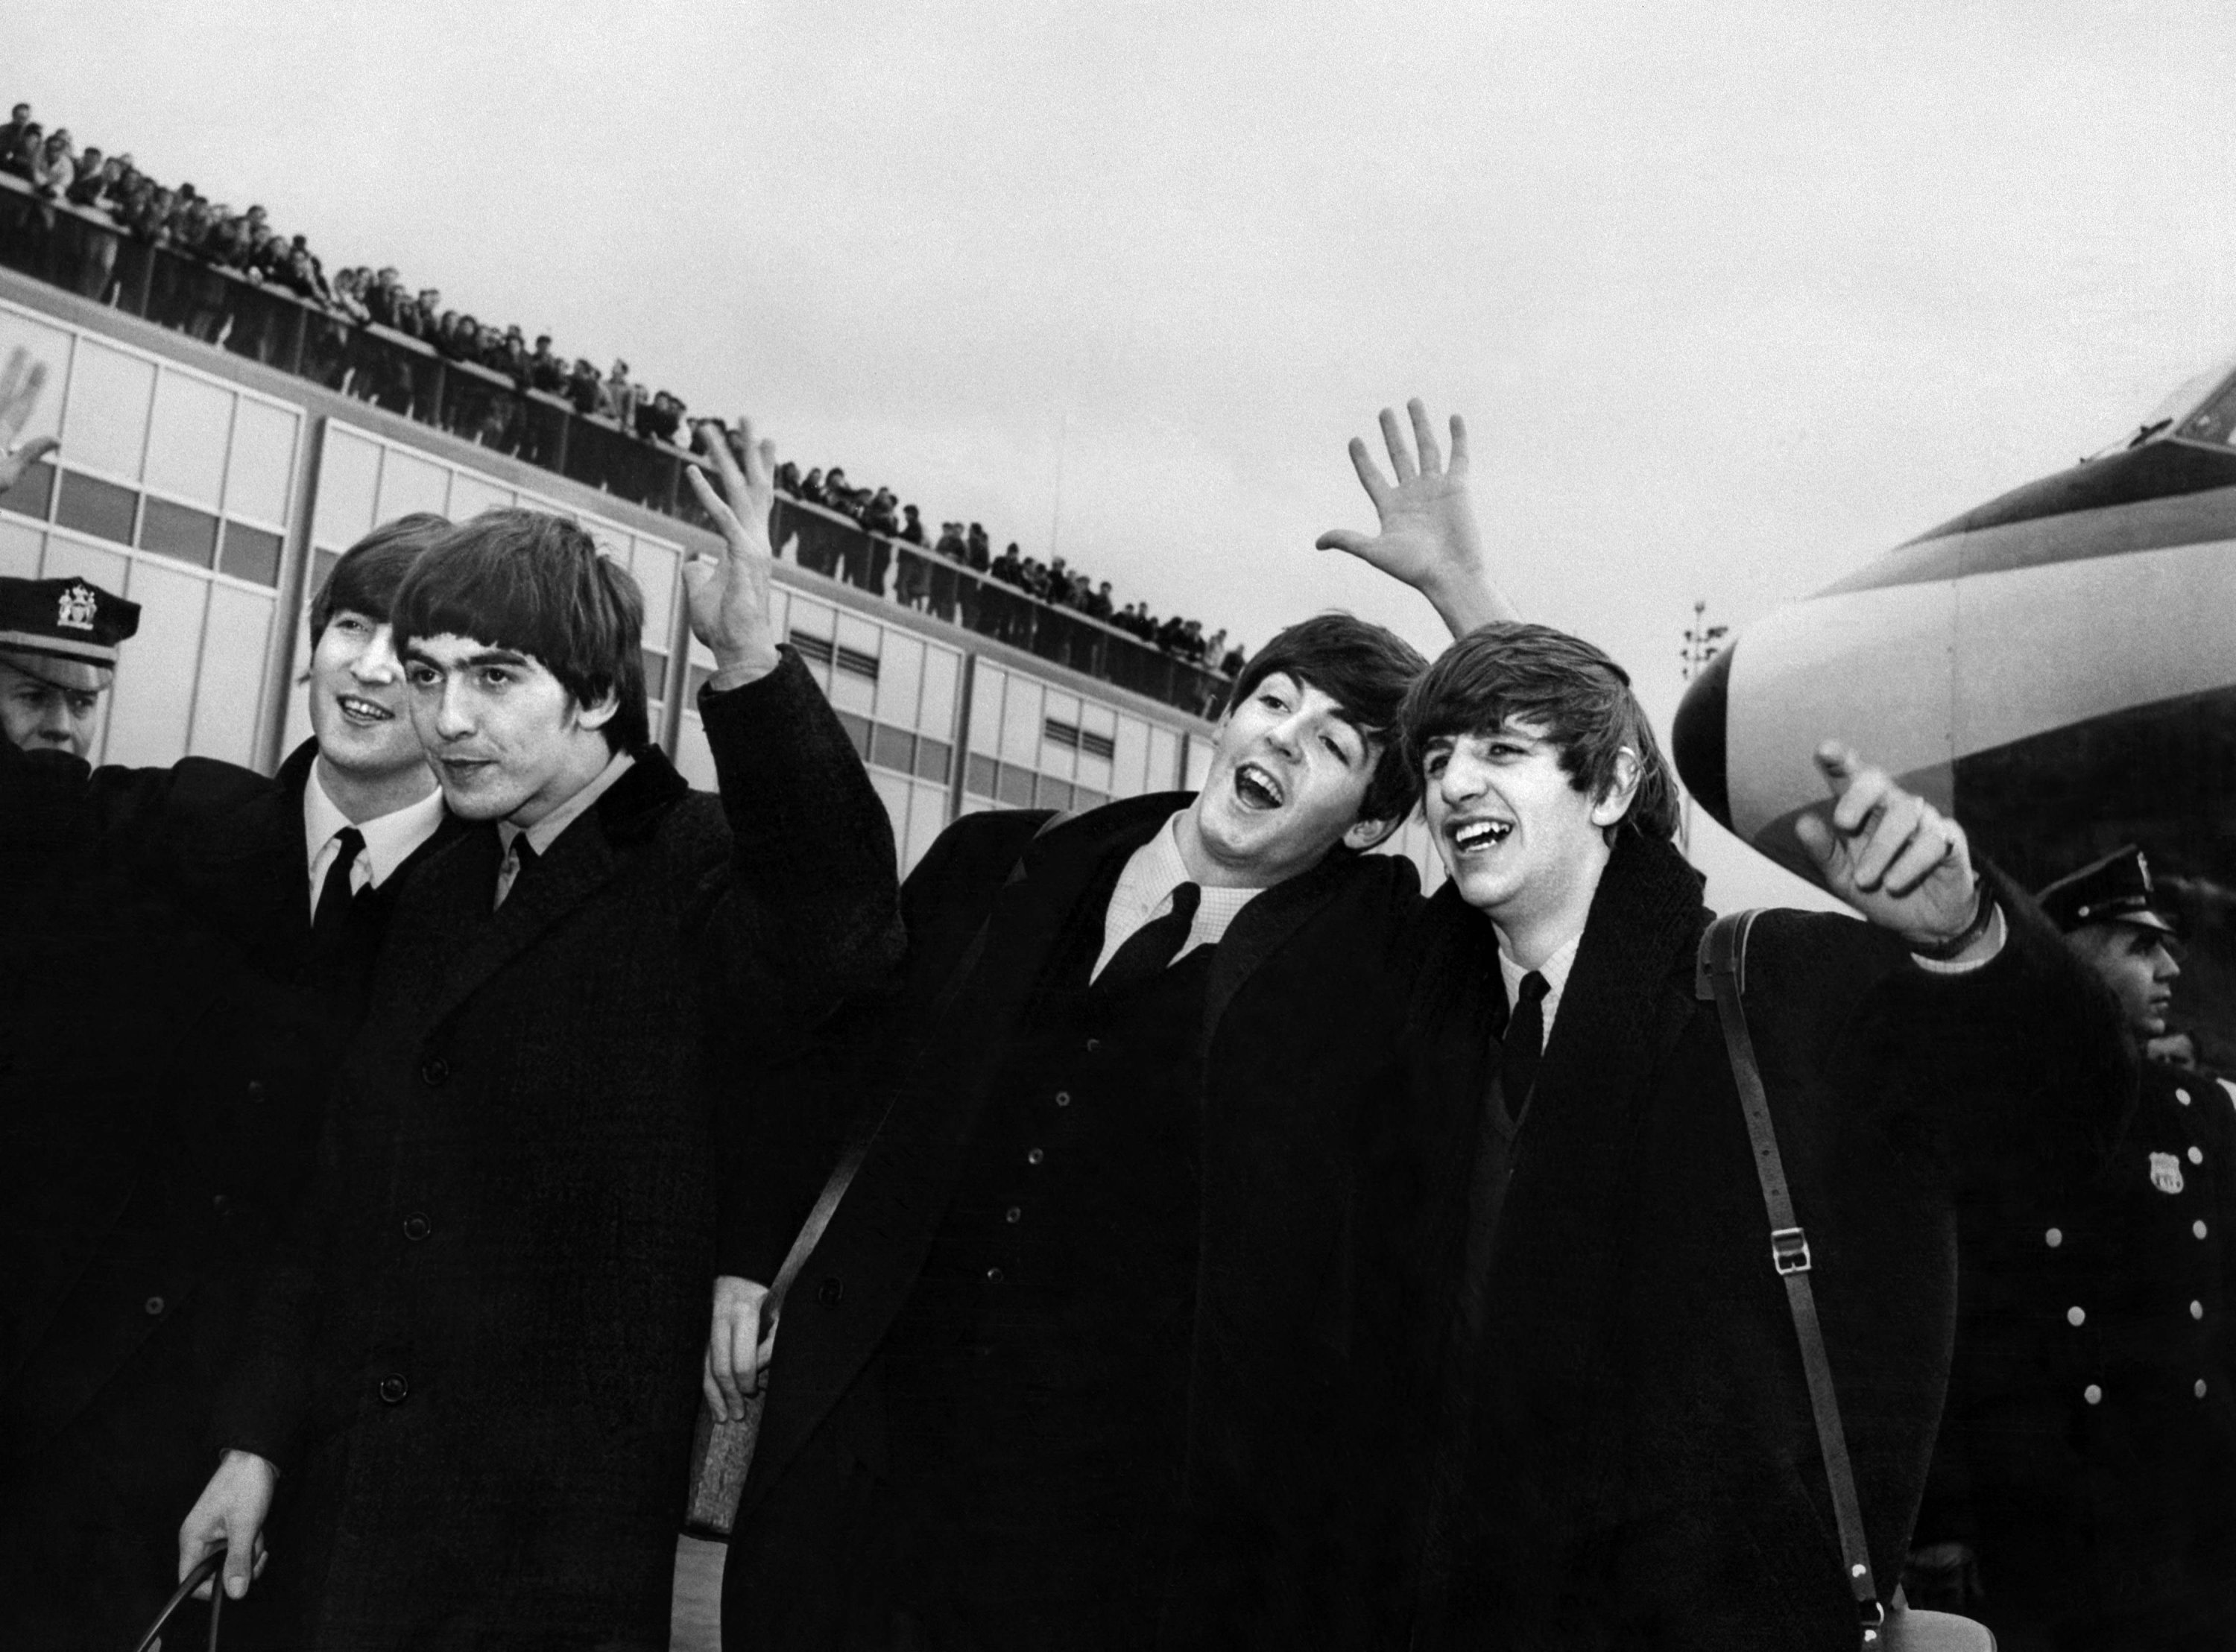 The Beatles, with (from L) John Lennon, Ringo Starr, Paul McCartney and George Harrison, arriving at John F Kennedy Airport in New York, U.S., Feb. 7, 1964. (AFP File Photo)